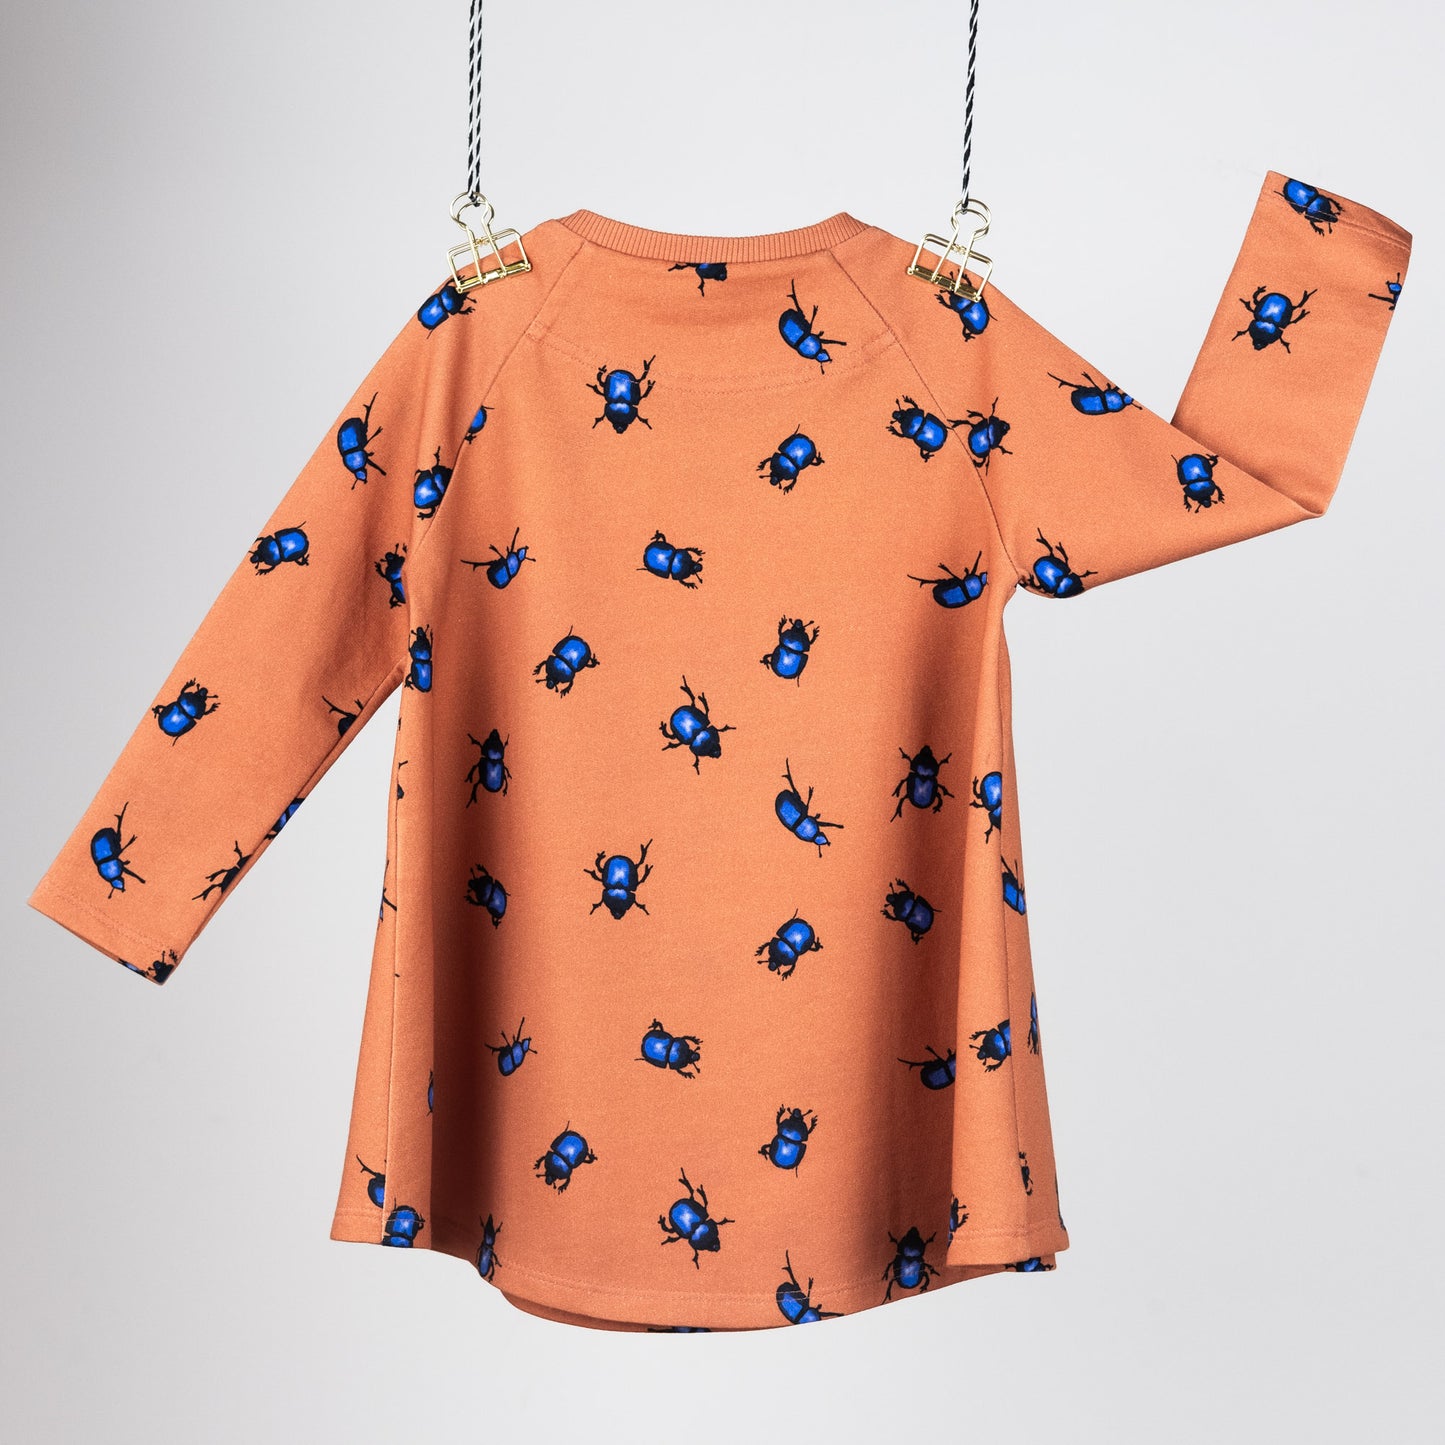 Back view of the Beetle's collection tunic dress. Hanging in front of a grey background. They are orange with blue beetles.